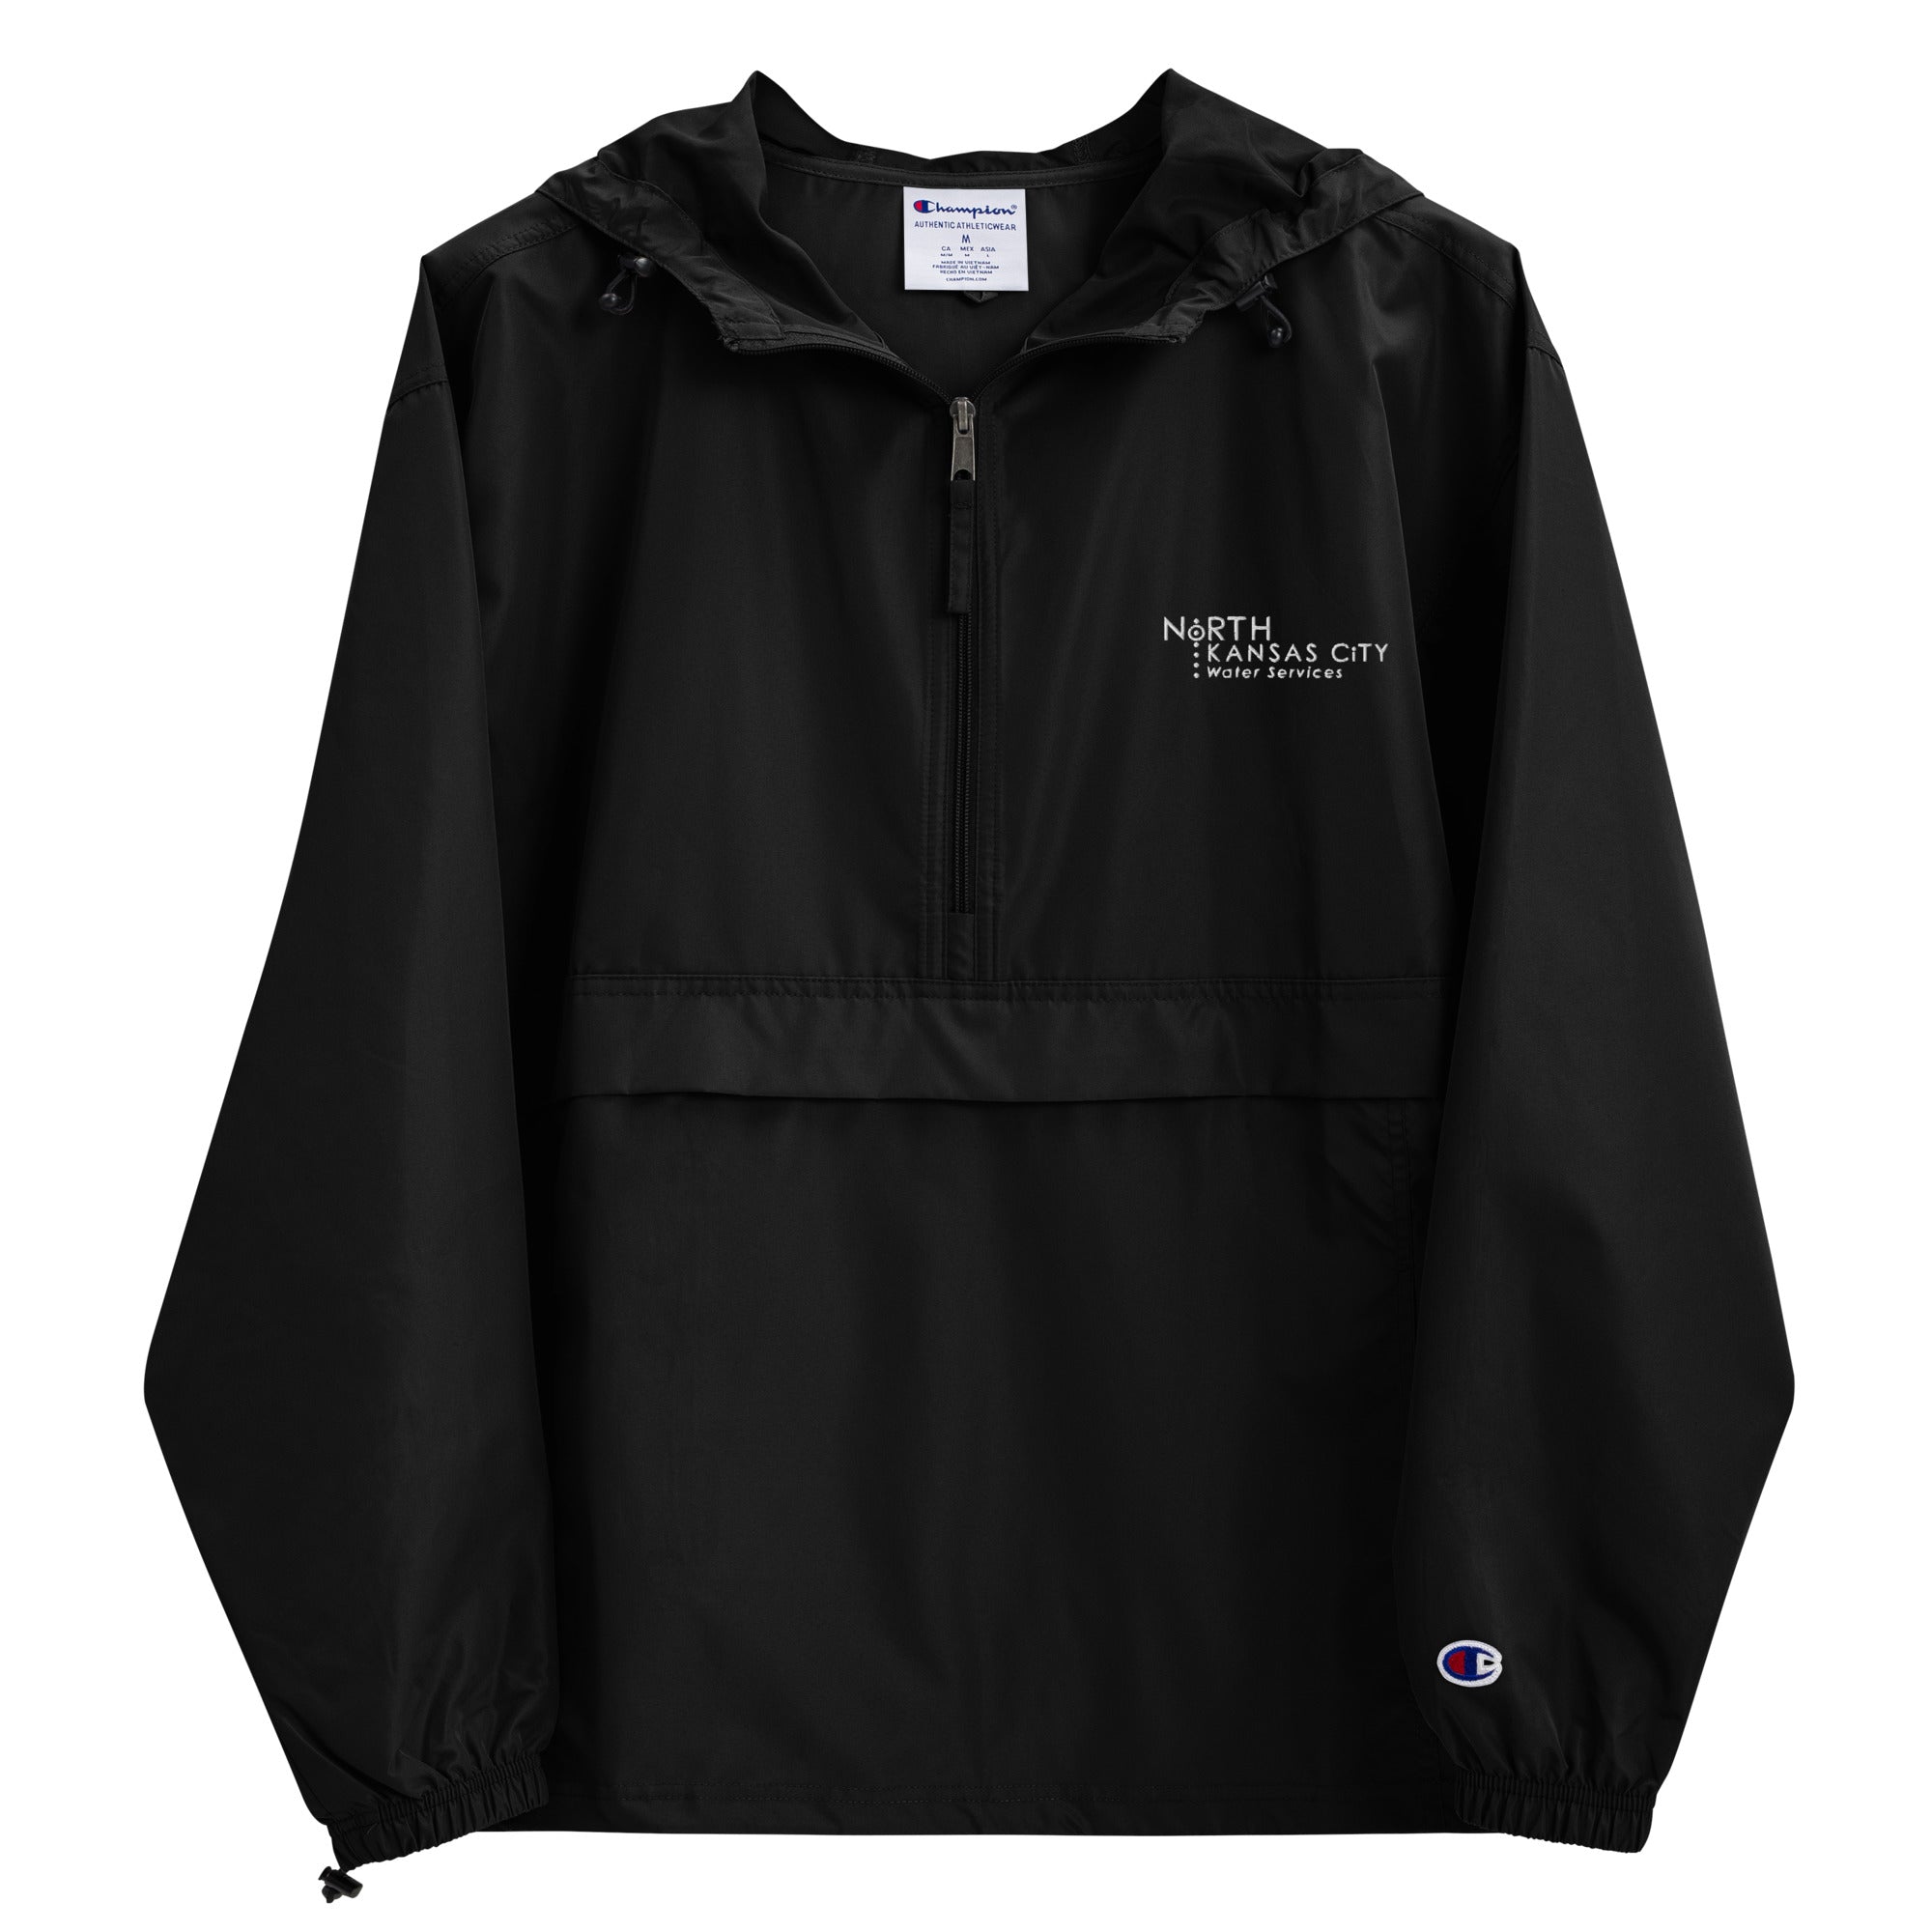 North Kansas City Water Services  Embroidered Champion Packable Jacket